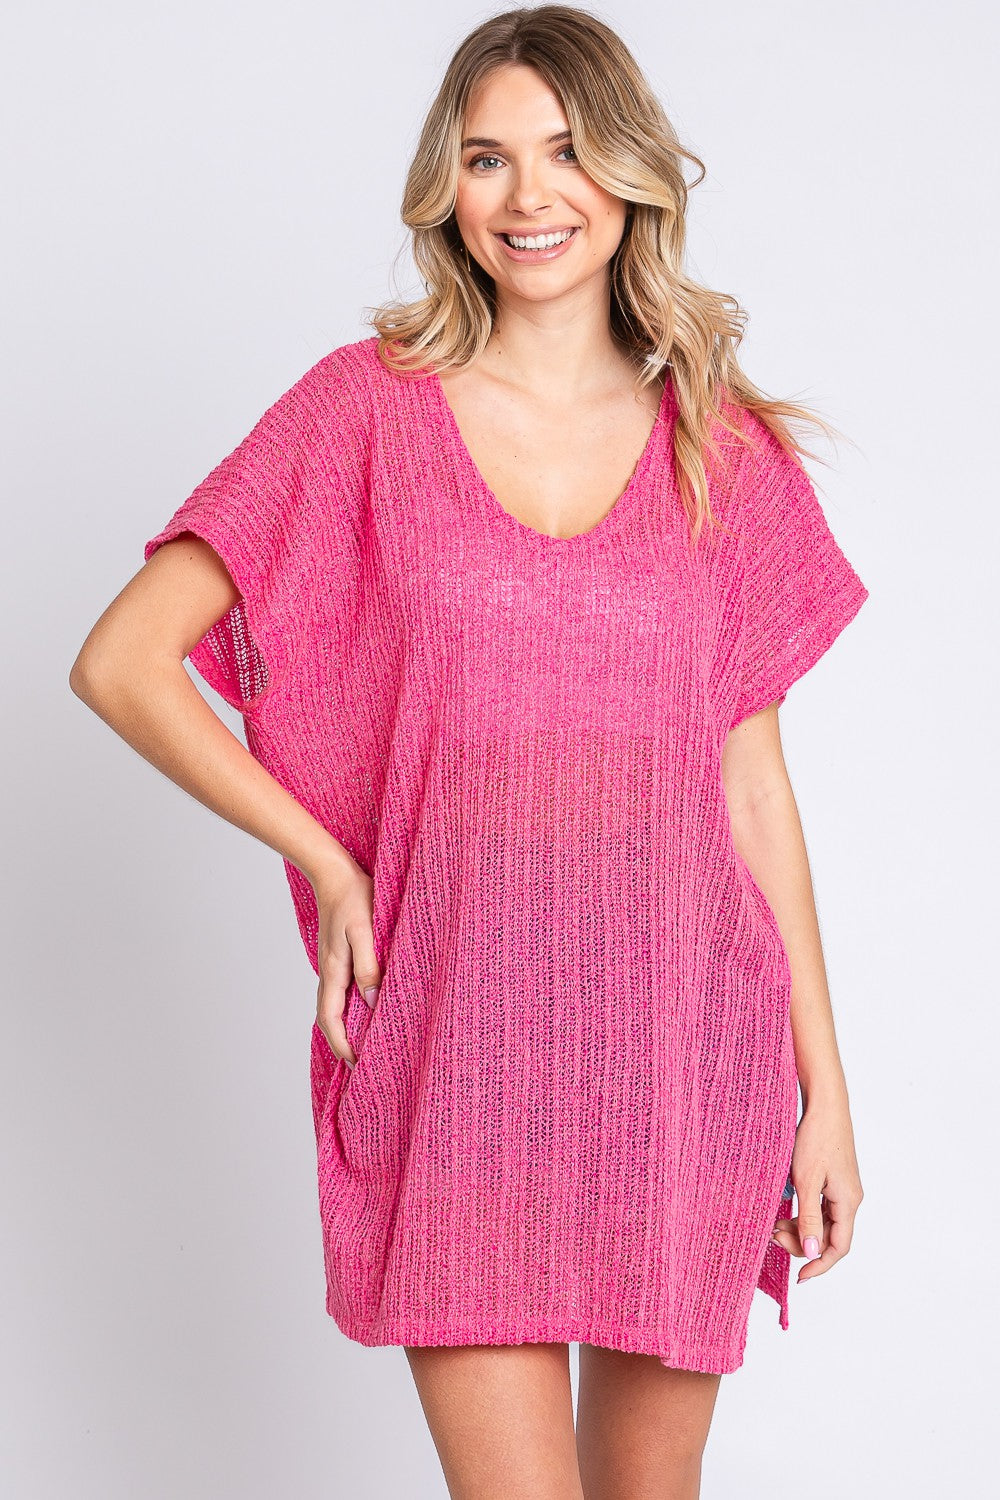 GeeGee Short Sleeve Side Slit Knit Cover Up Dress - Babbazon PINK CLOTHING